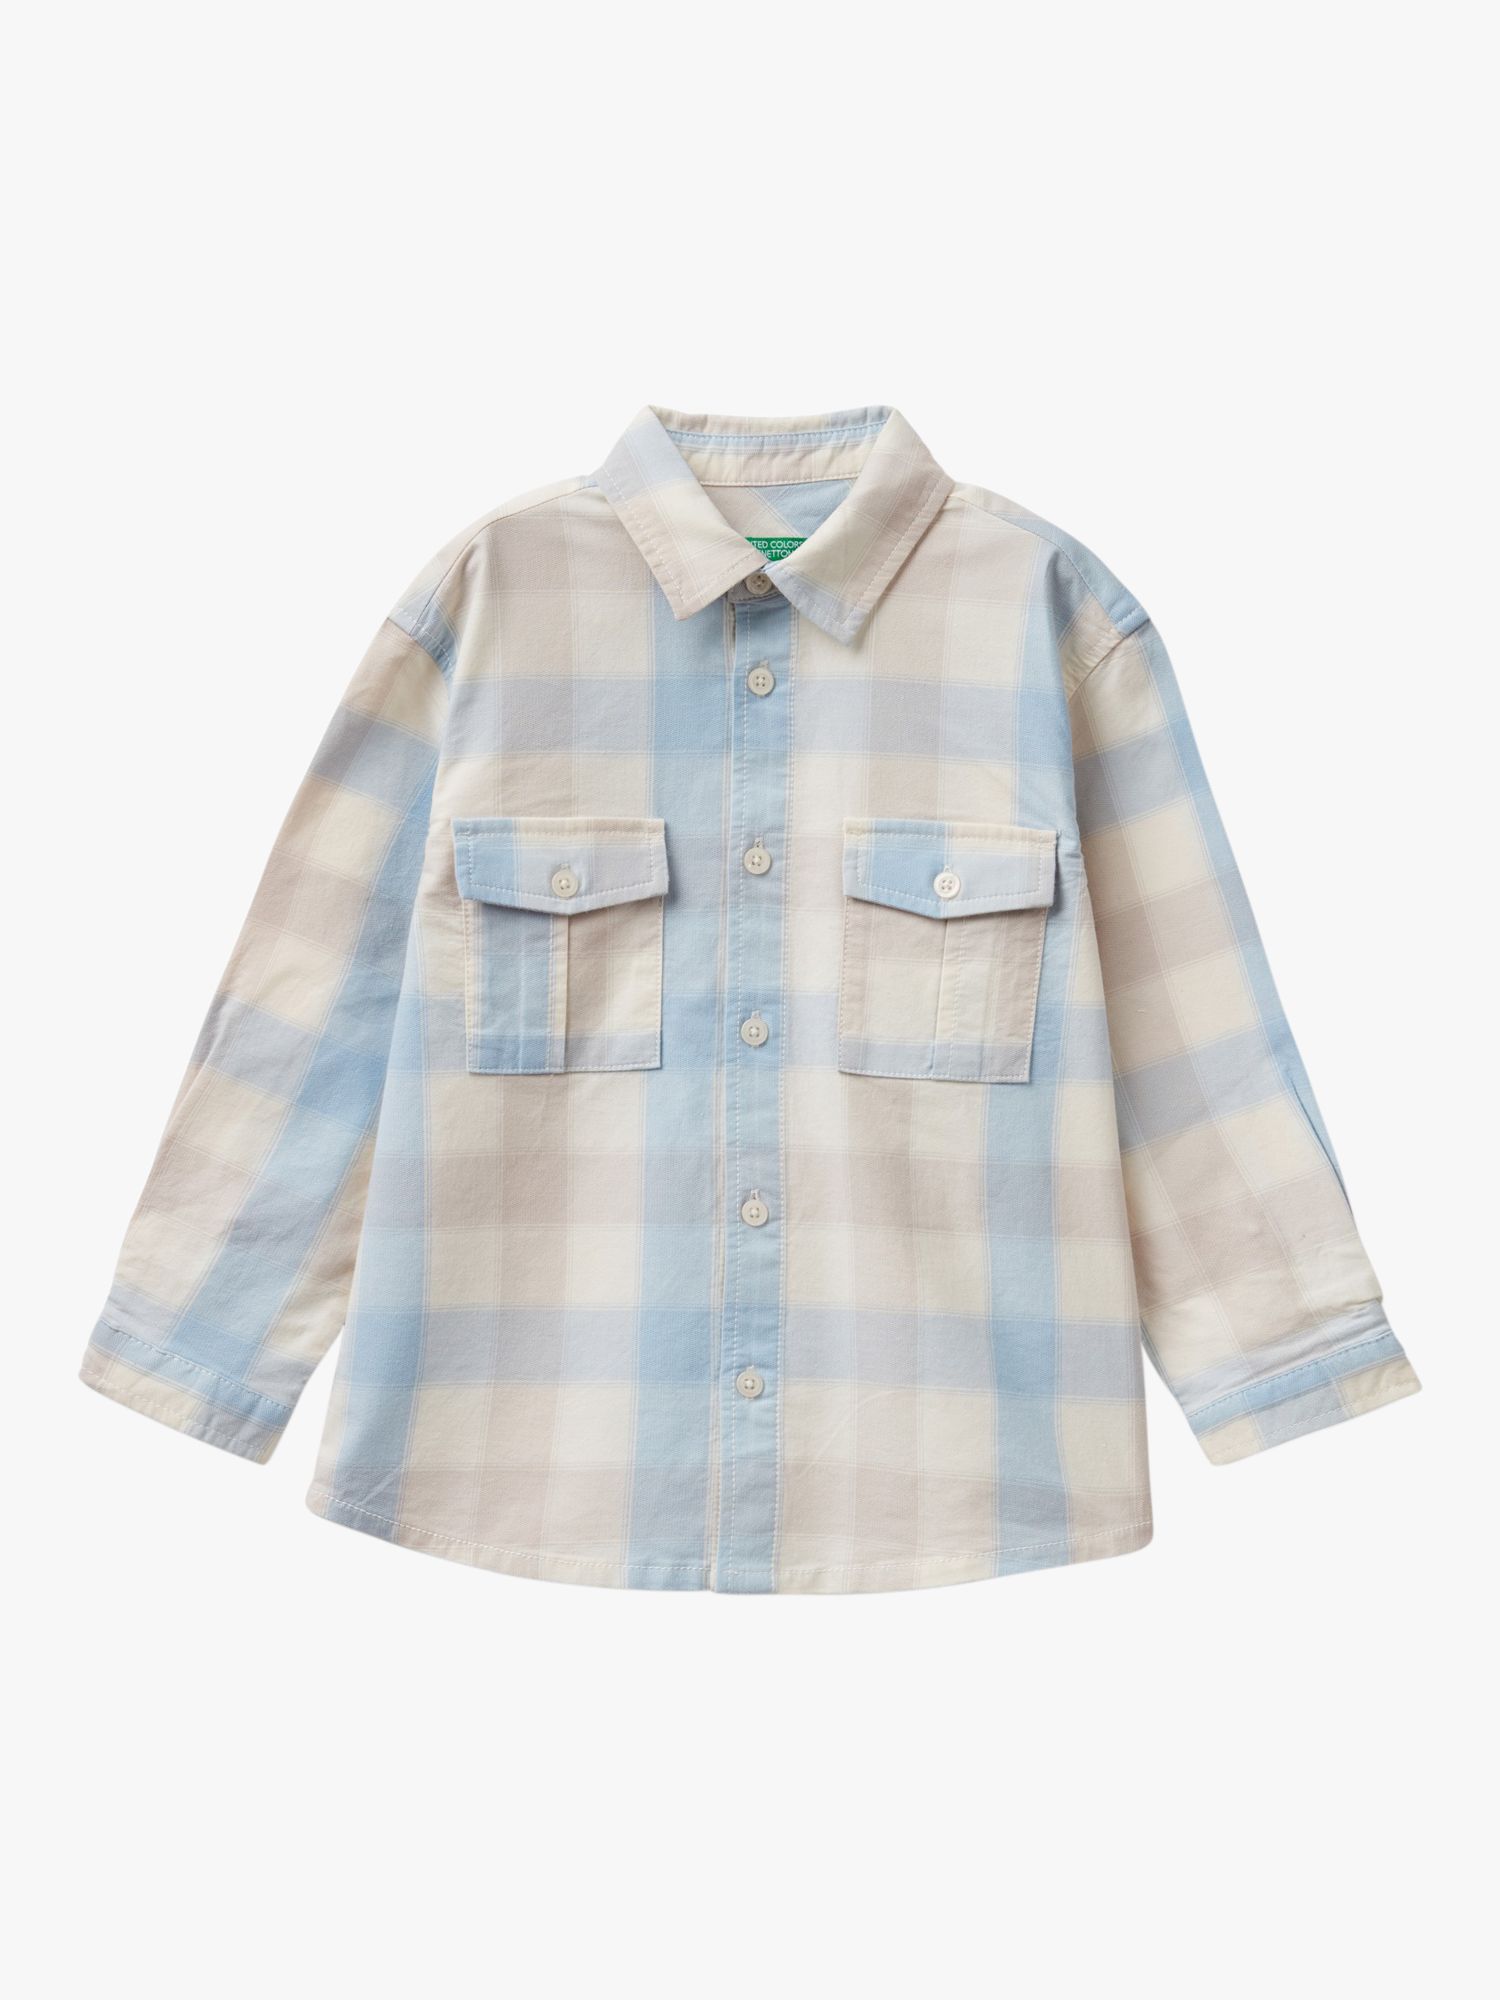 Benetton Kids' Checked Casual Long Sleeve Shirt, Blue/Multi, 2-3 years